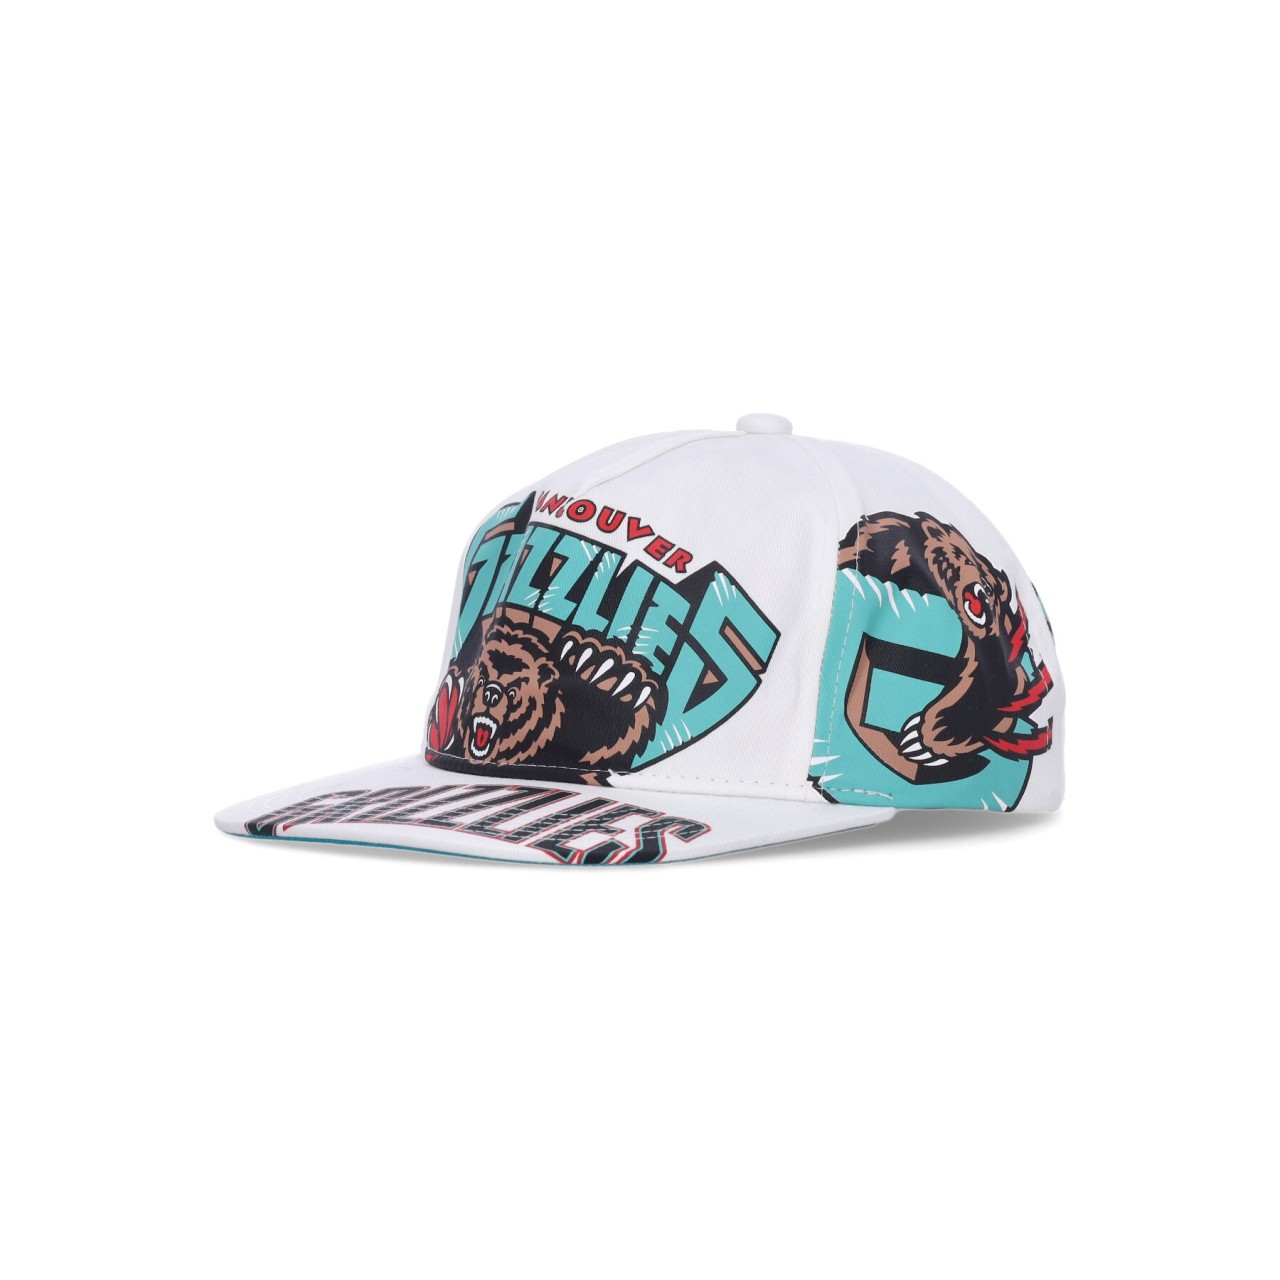 MITCHELL & NESS NBA IN YOUR FACE DEADSTOCK HWC VANGRI HMUS5600-VGRYYPPPWHIT